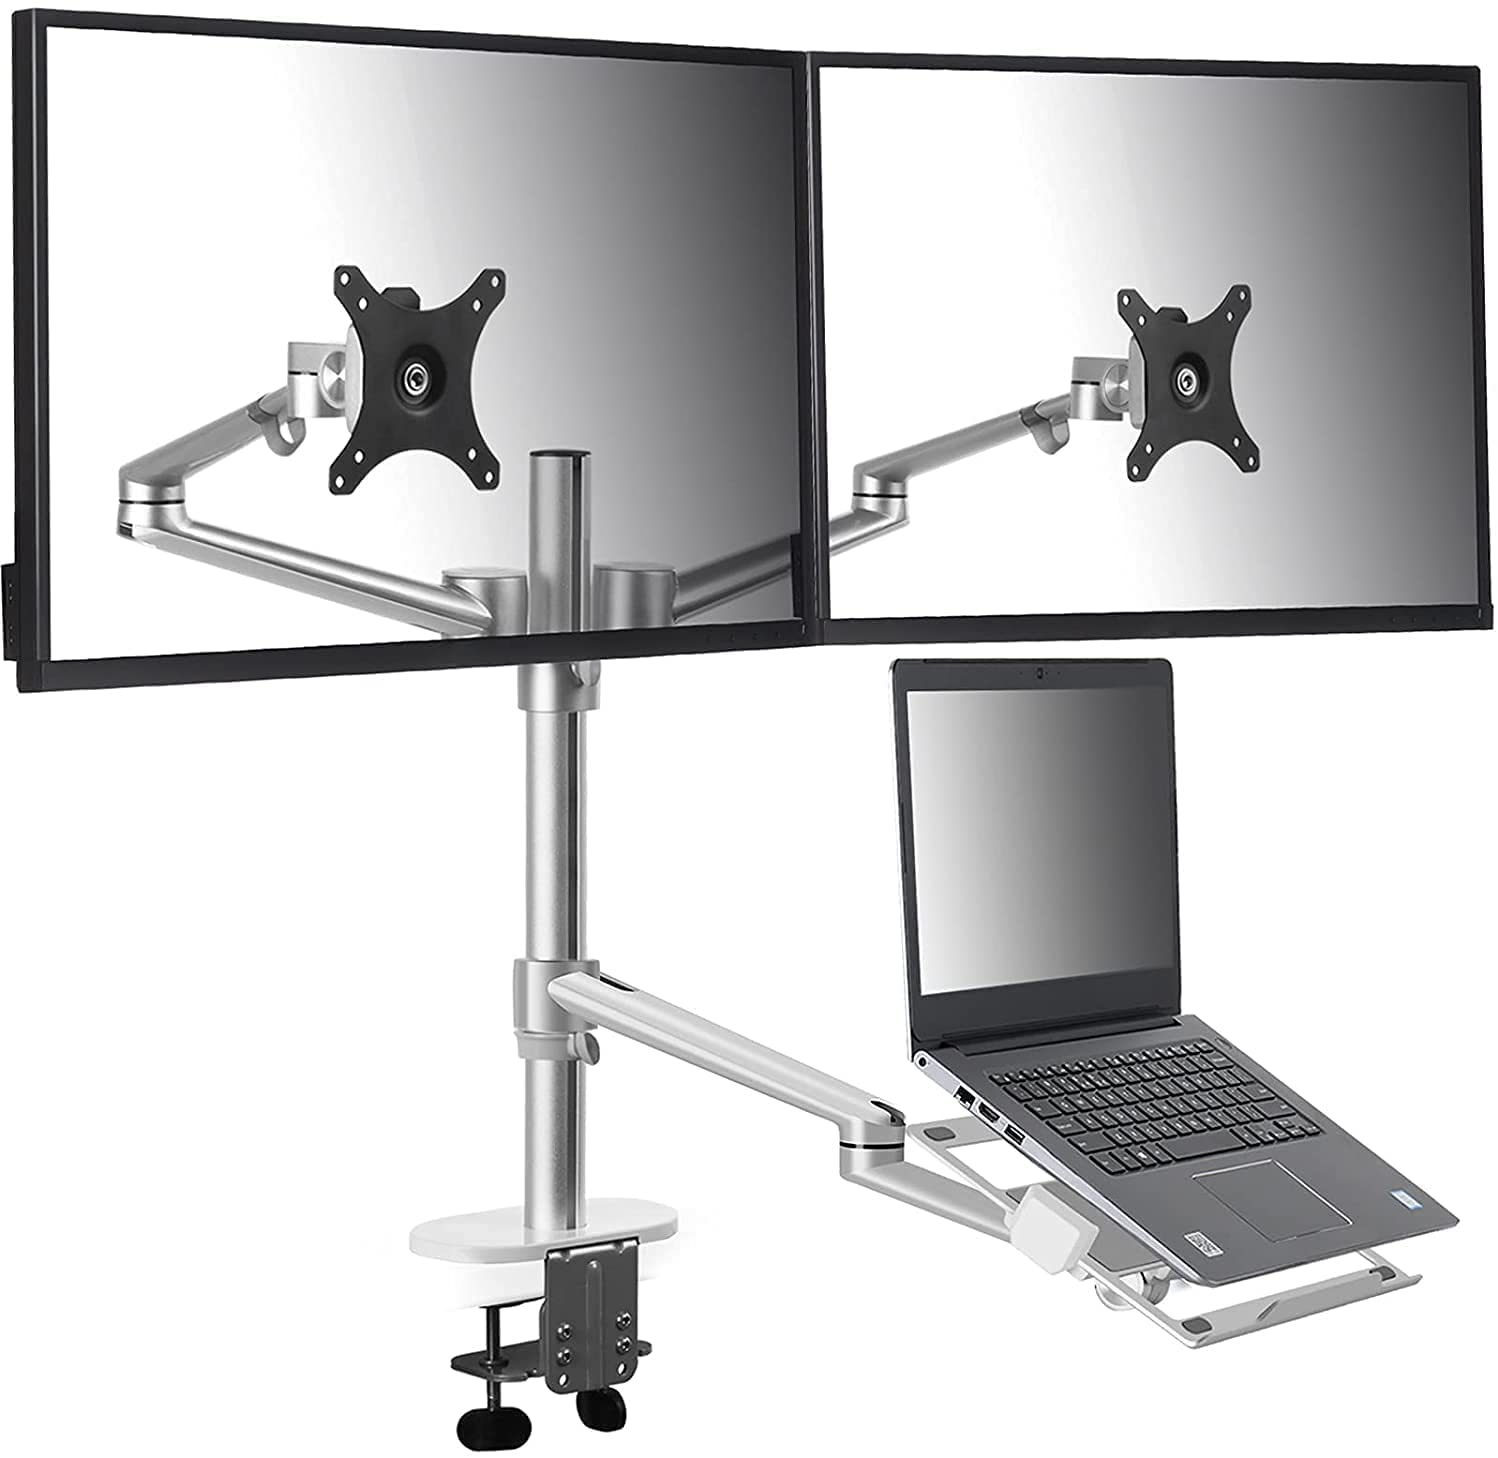 Support Two Monitors and Laptop OPE-37